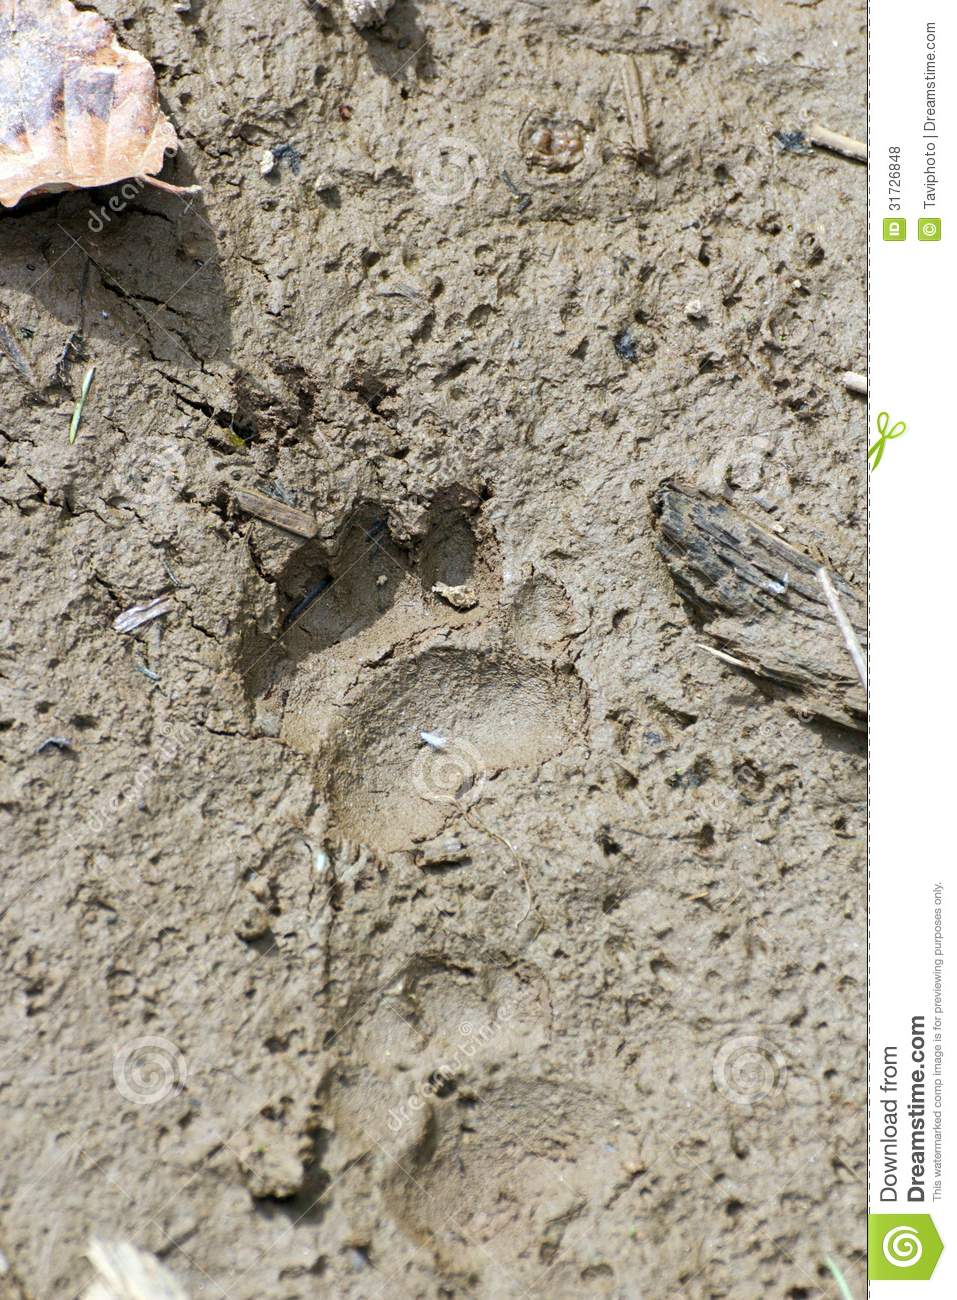 Badger Footprint In The Mud Royalty Free Stock Photos   Image    